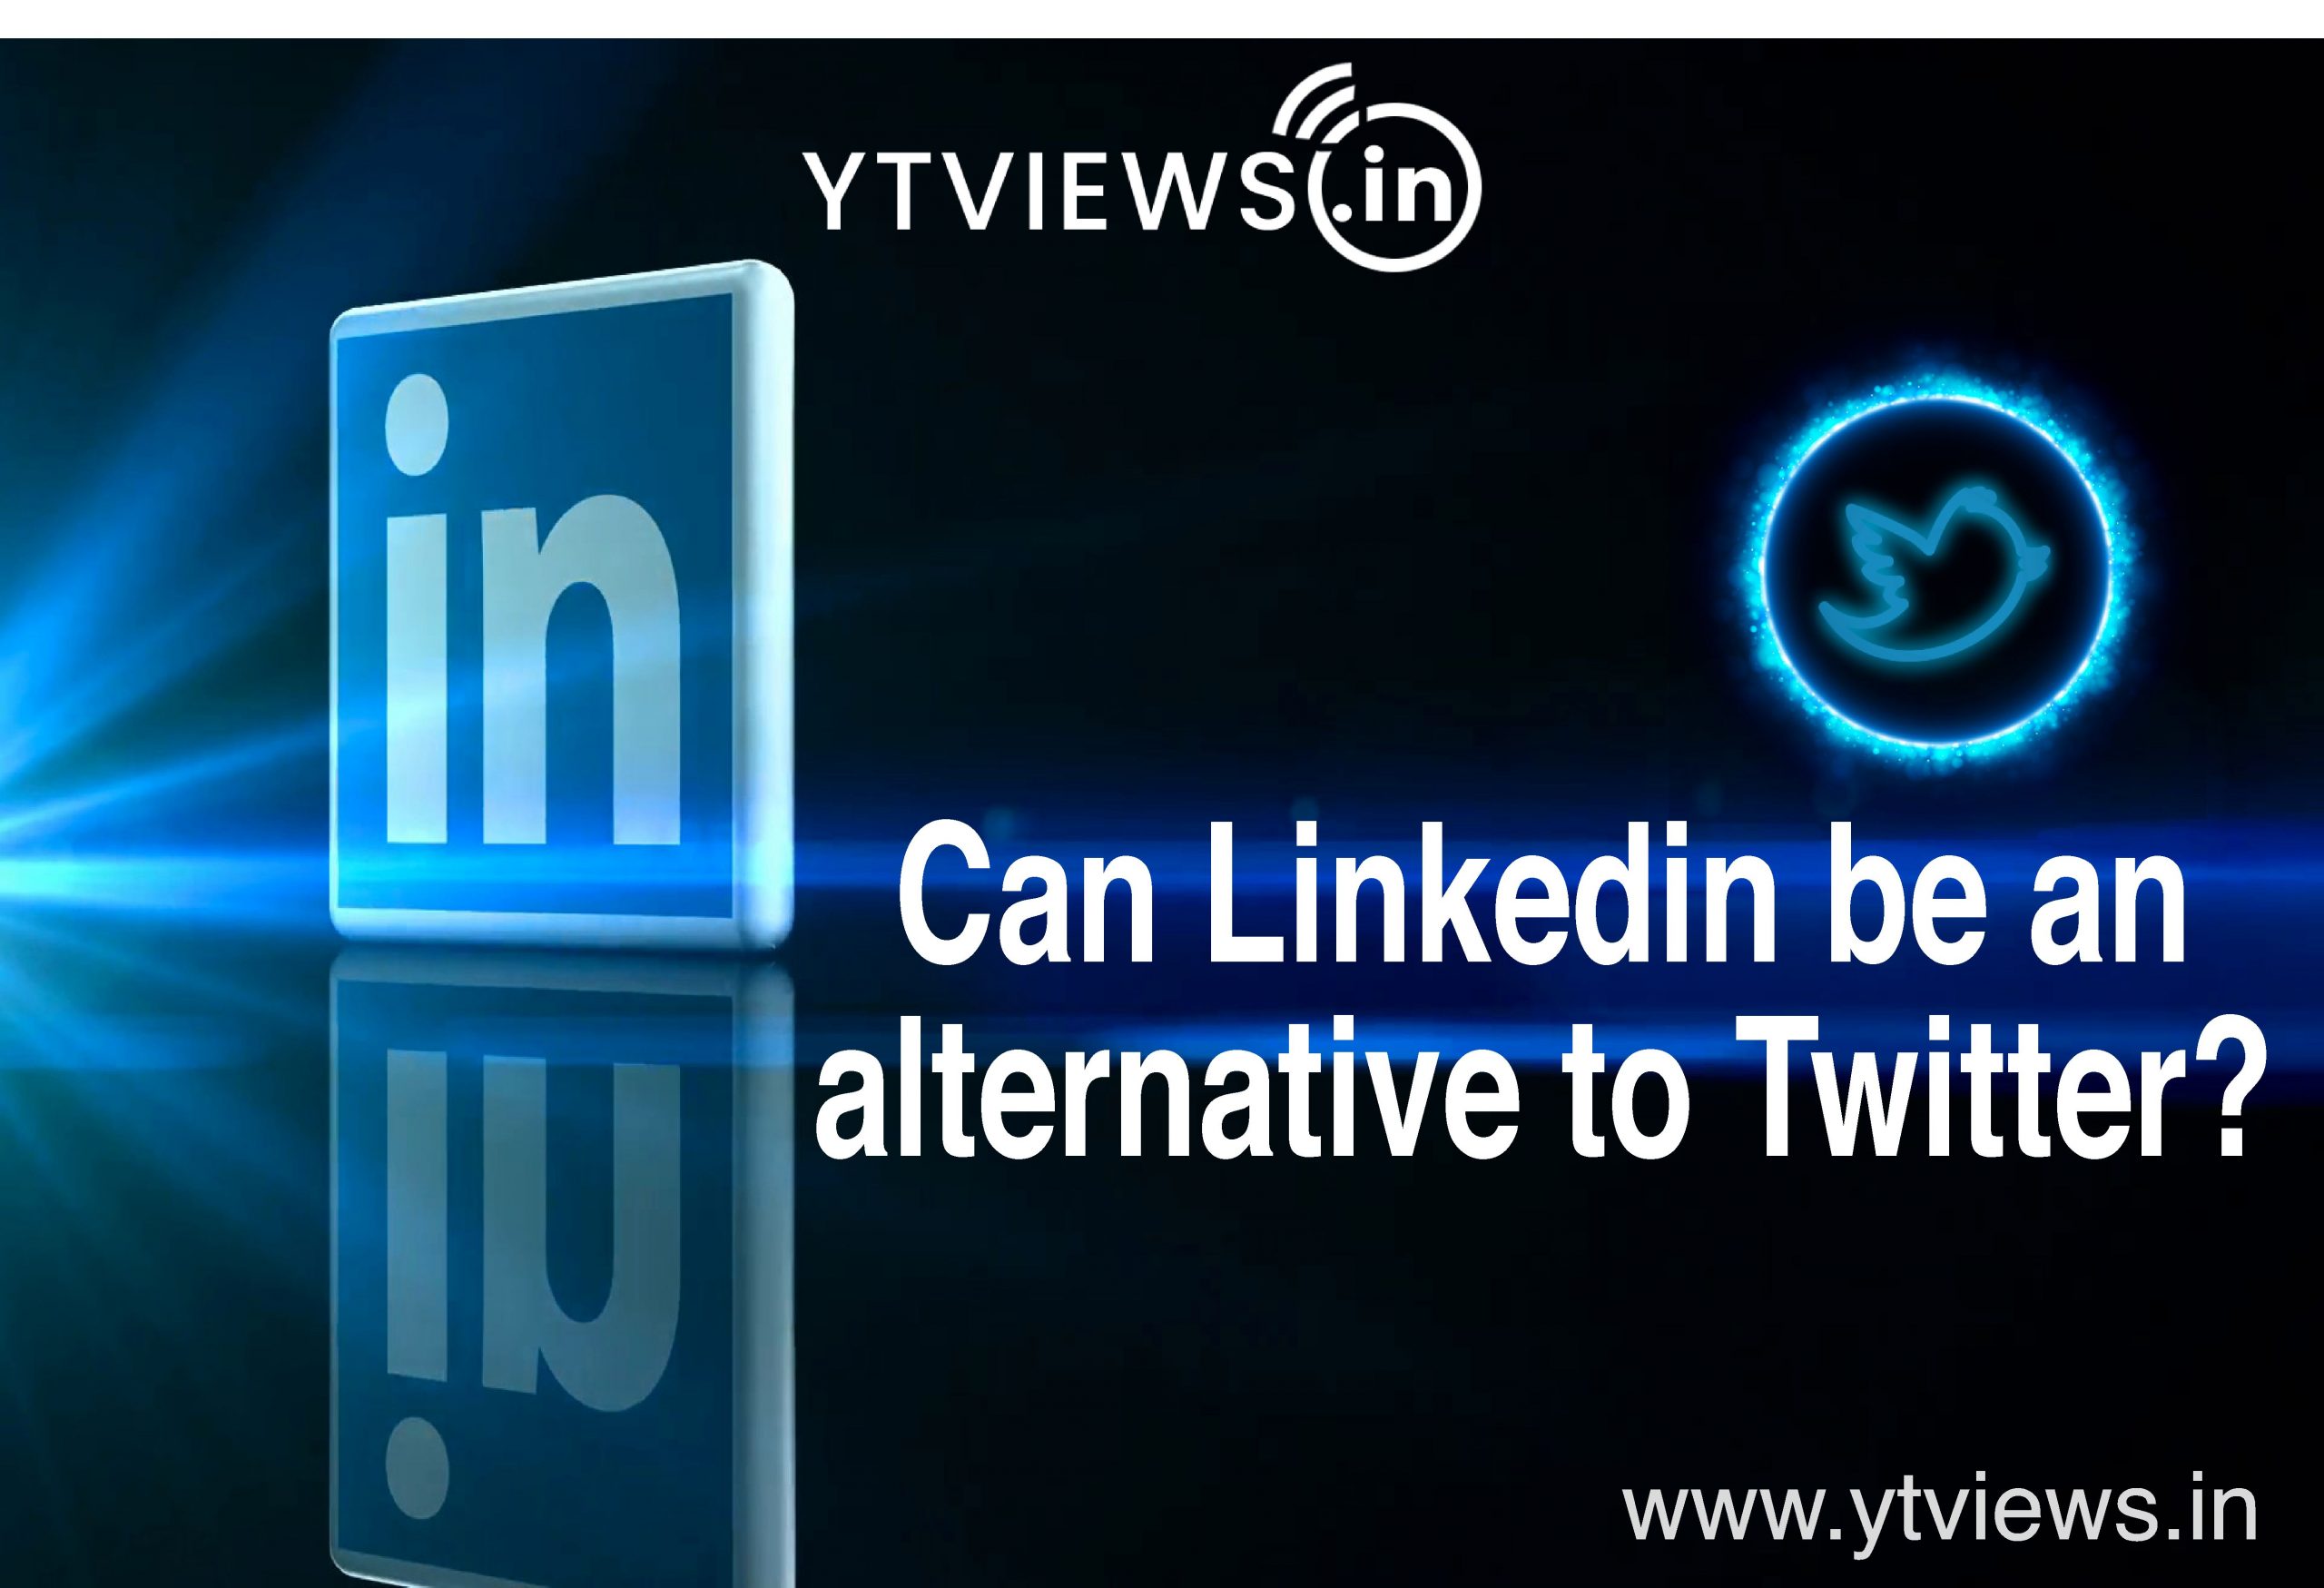 Can LinkedIn be an alternative to Twitter?